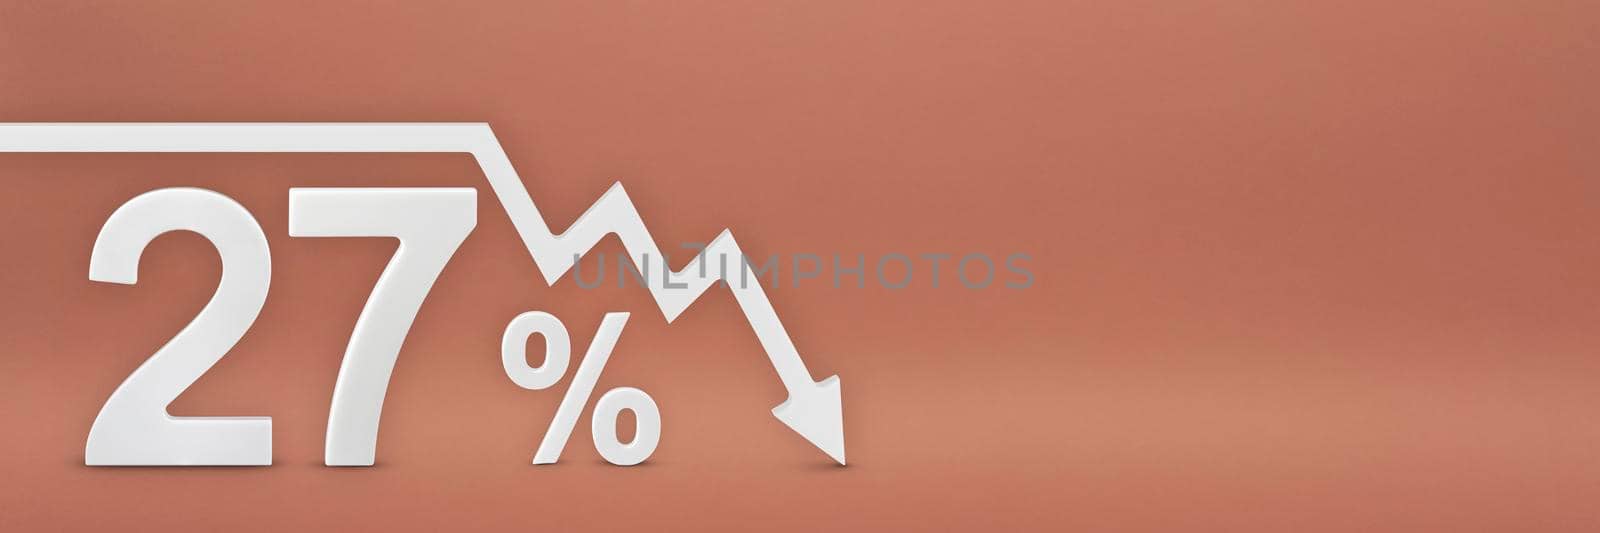 twenty-seven percent, the arrow on the graph is pointing down. Stock market crash, bear market, inflation.Economic collapse, collapse of stocks.3d banner, 27 percent discount sign on a red background